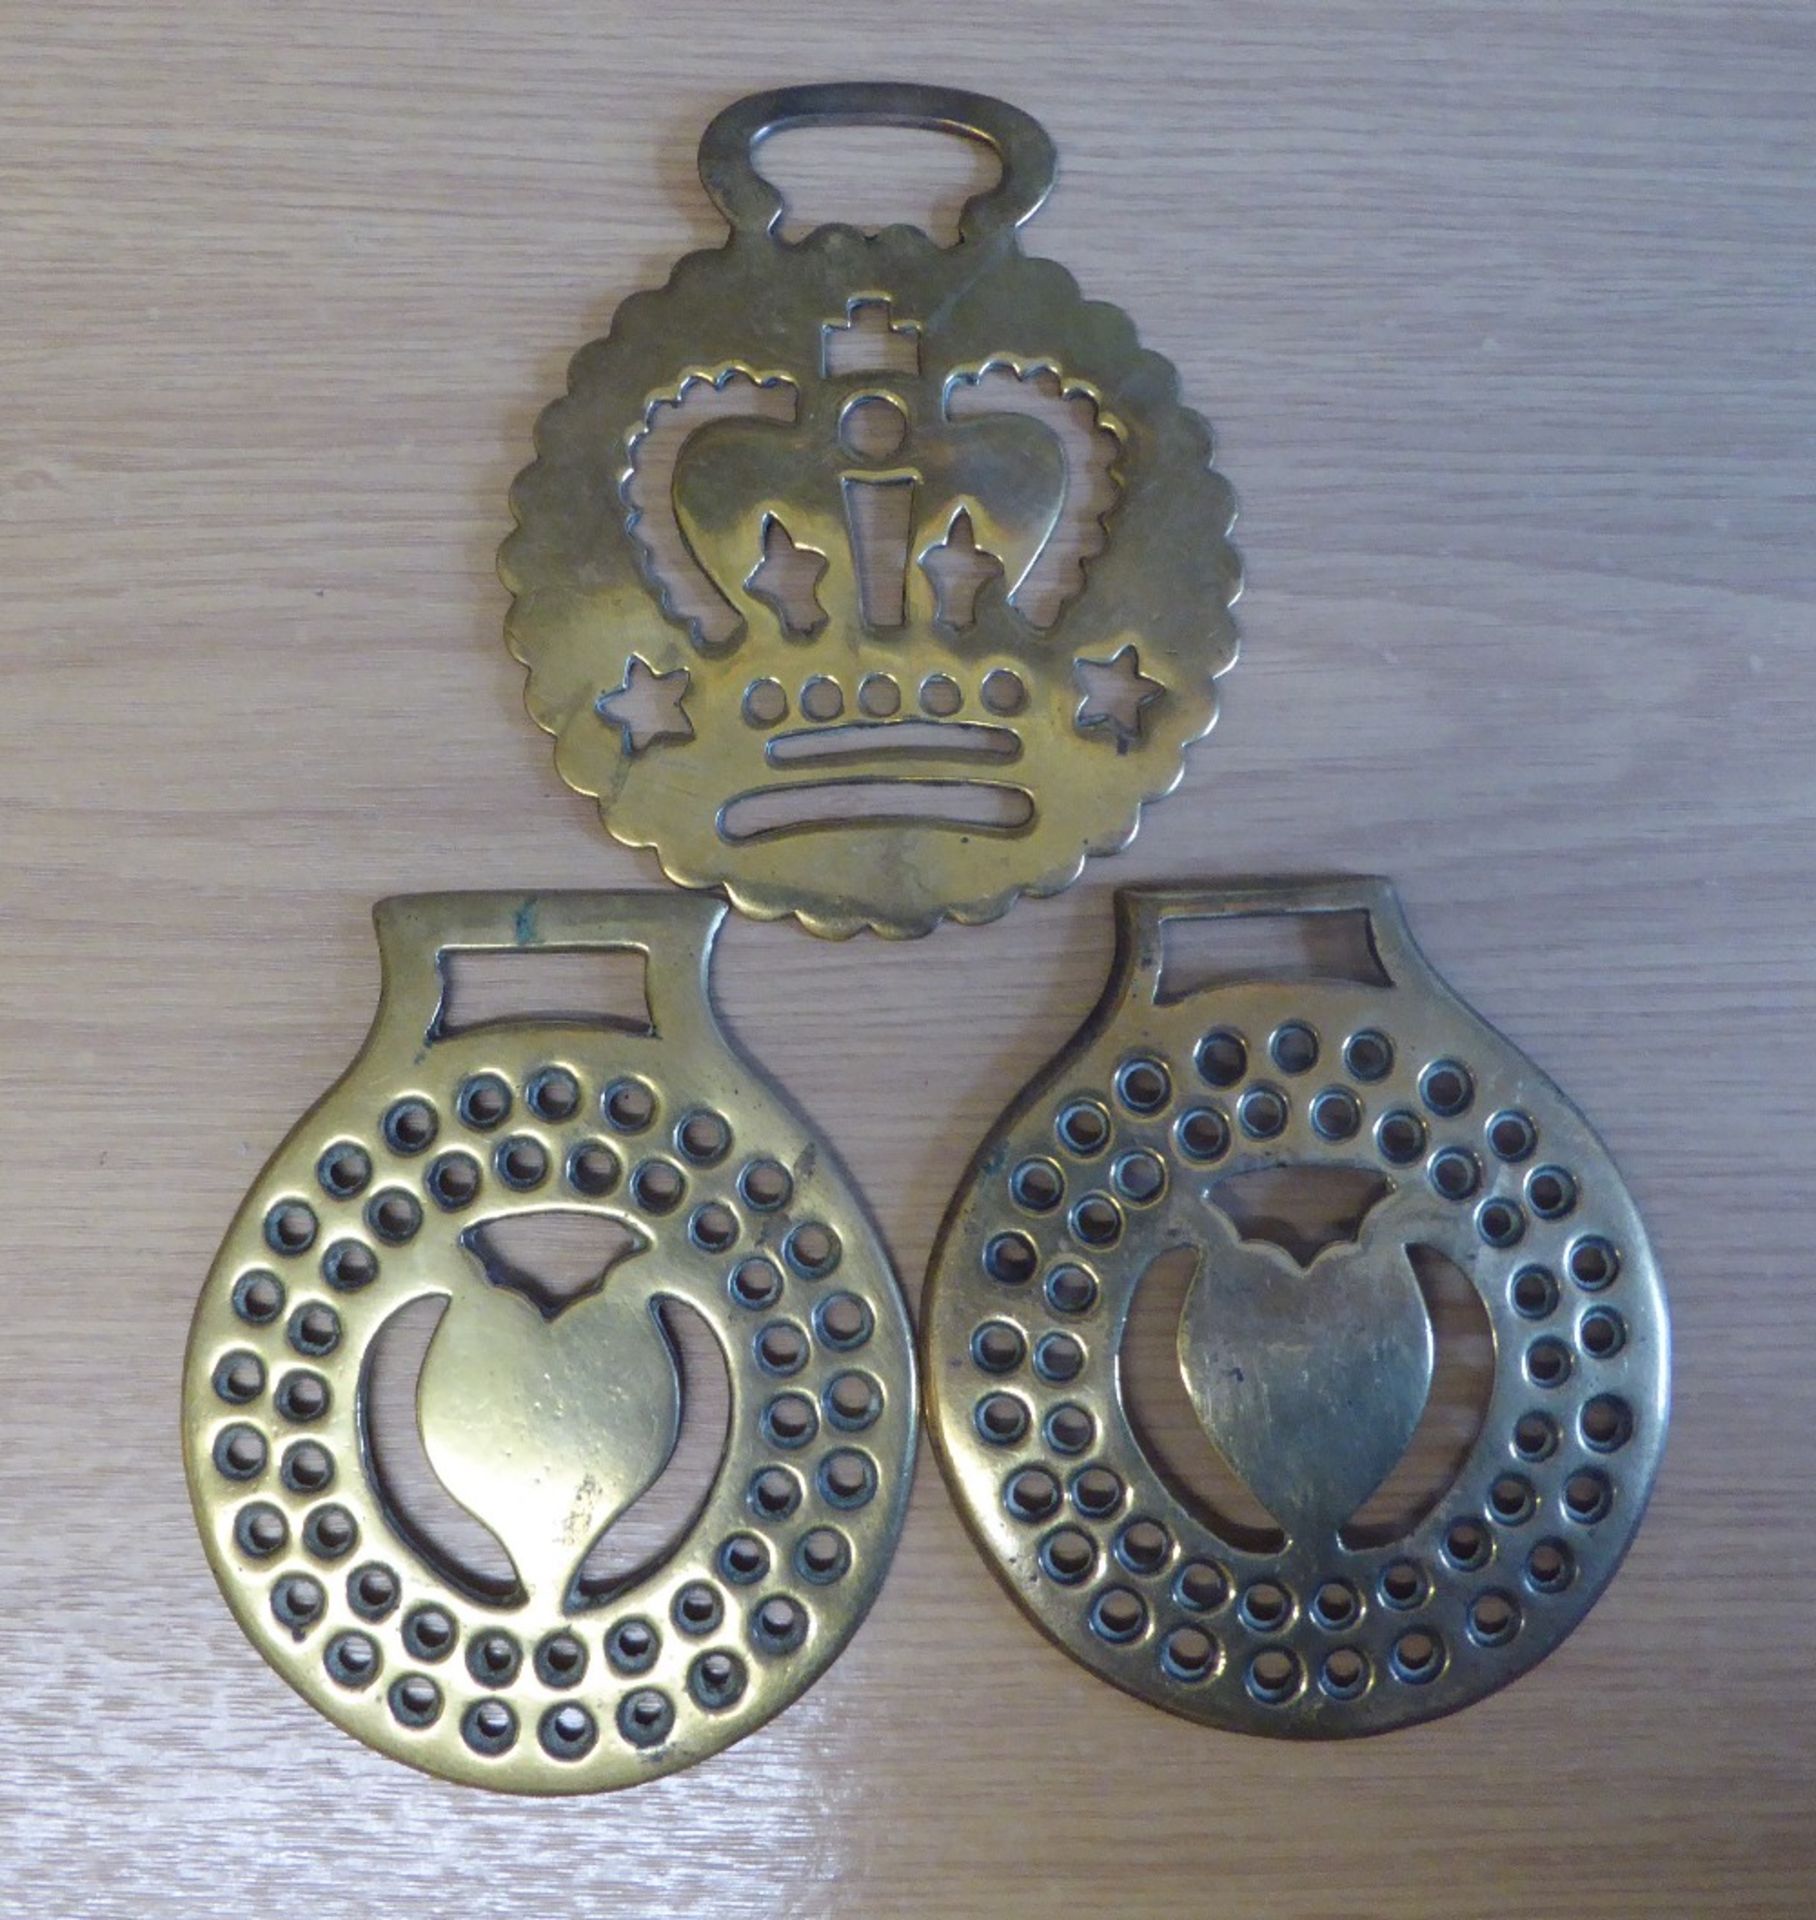 3 brasses - 2 cast brasses with heart centres surrounded by perforations and getts on reverse, and a